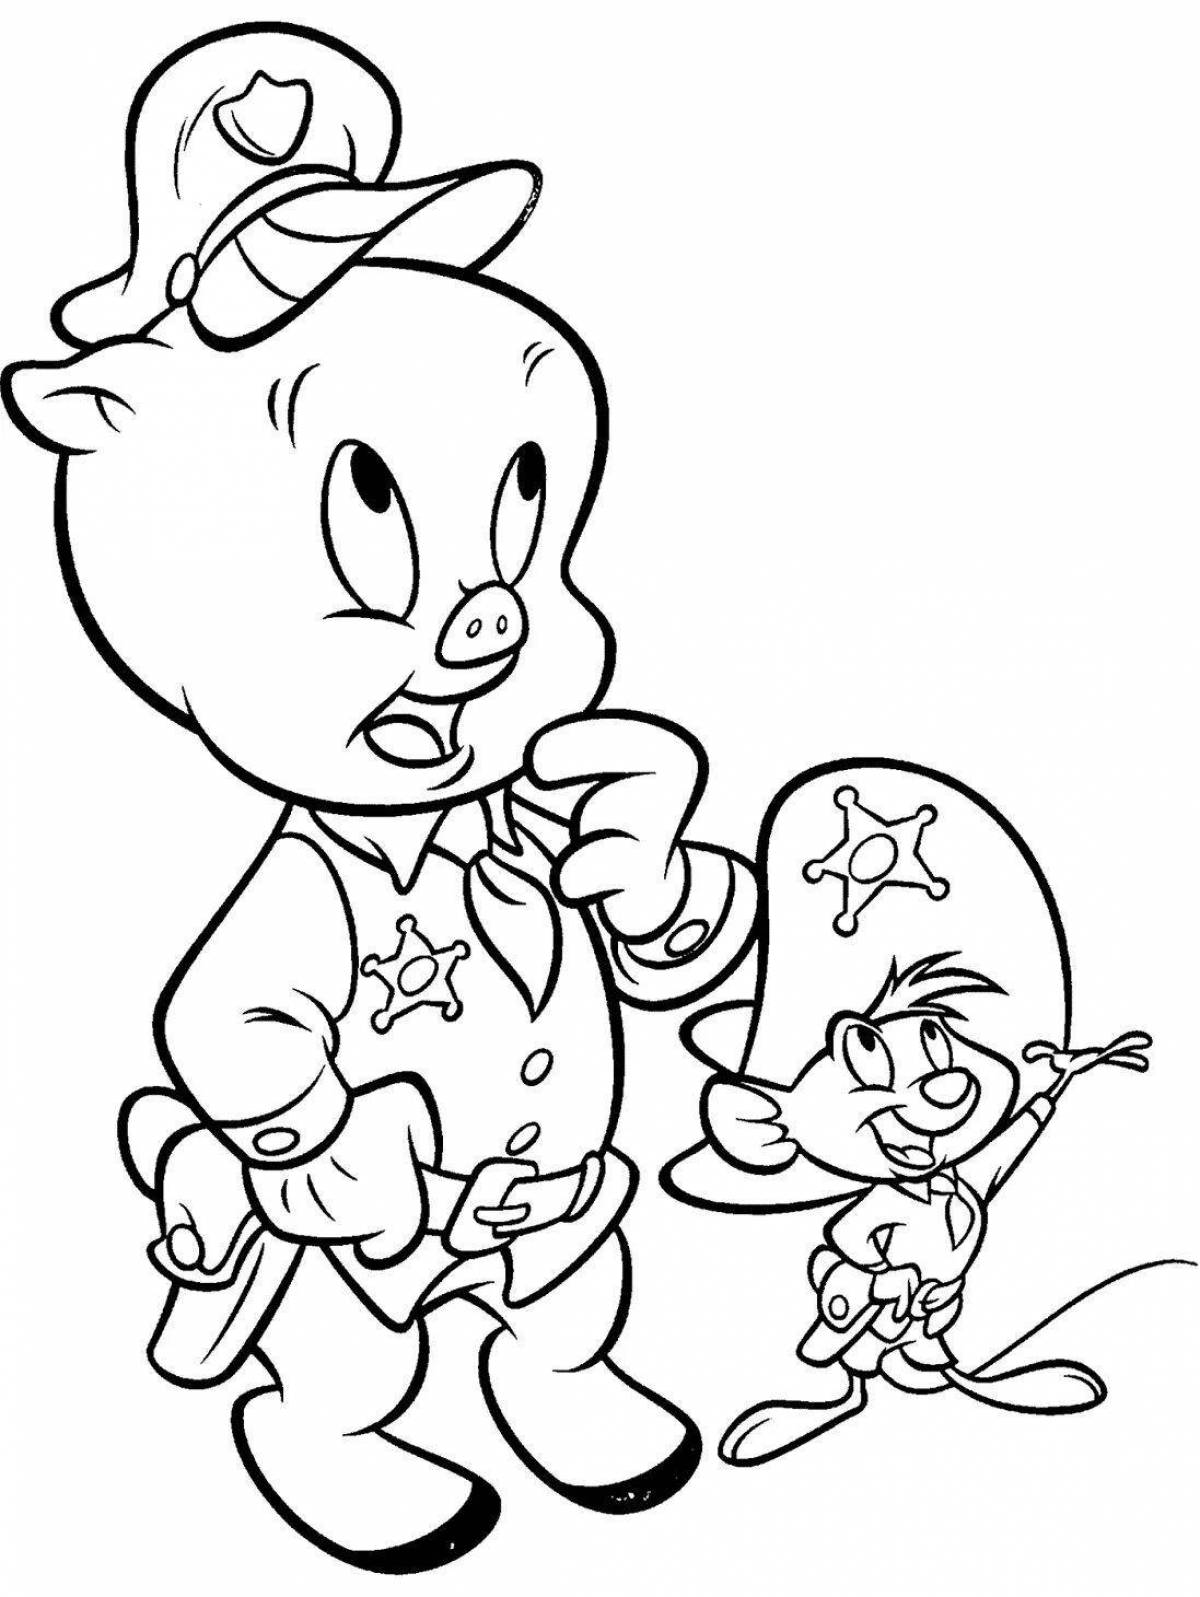 Coloring page of a funny cartoon character